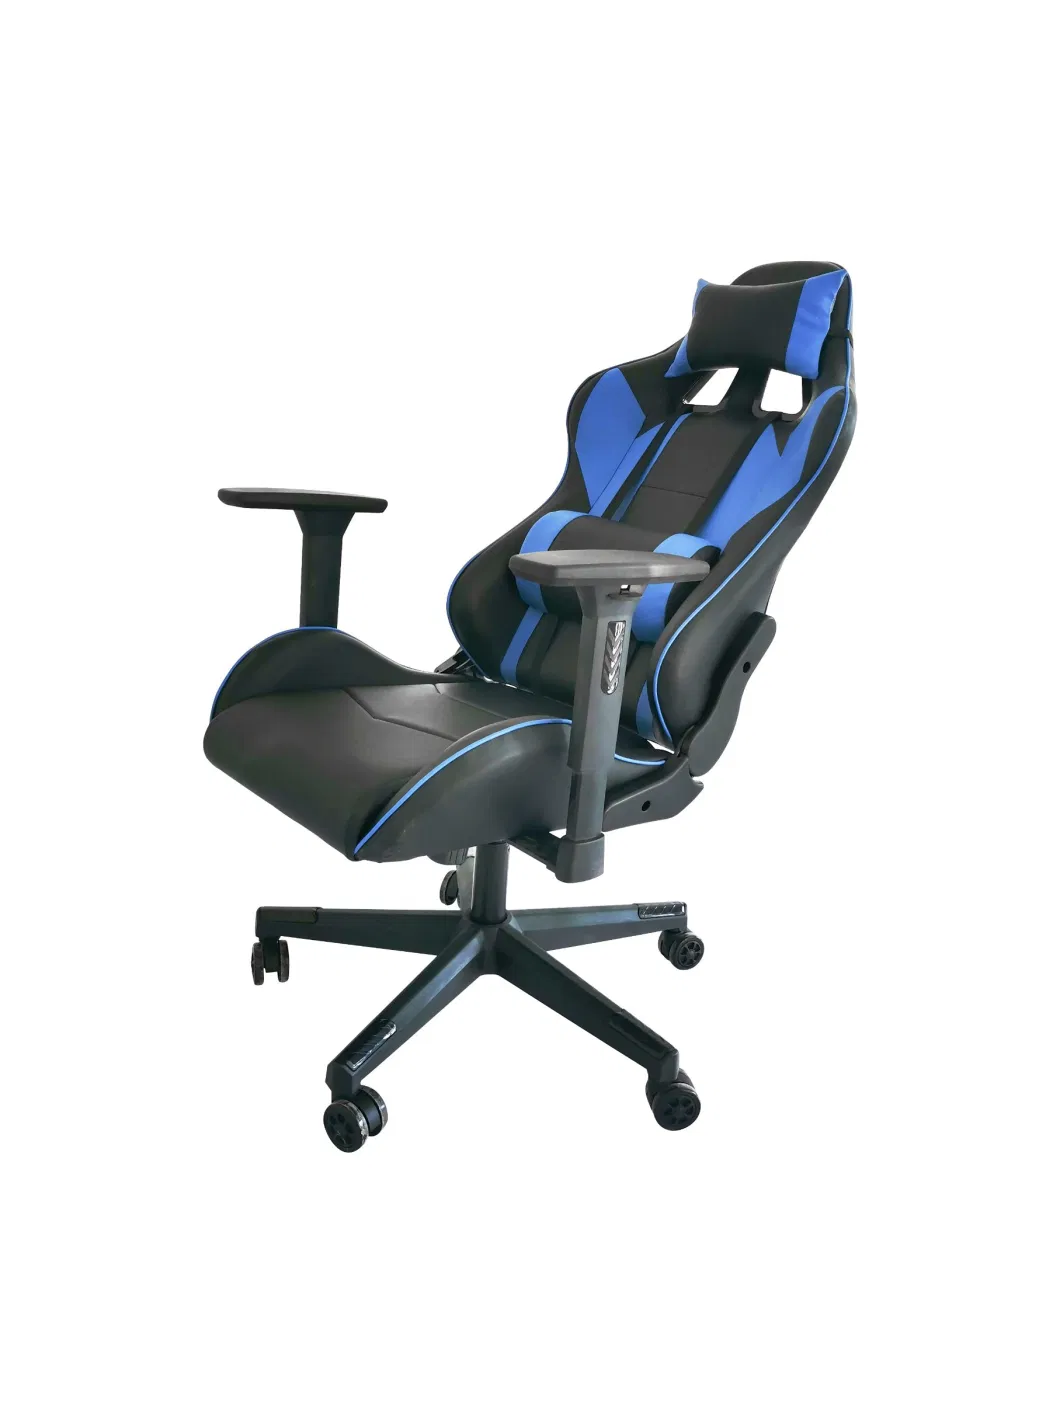 Popular Newest Design Ergonomic Office Furniture Racing Computer Desk Gaming Chair with Different Embroidery and Printing Pattern